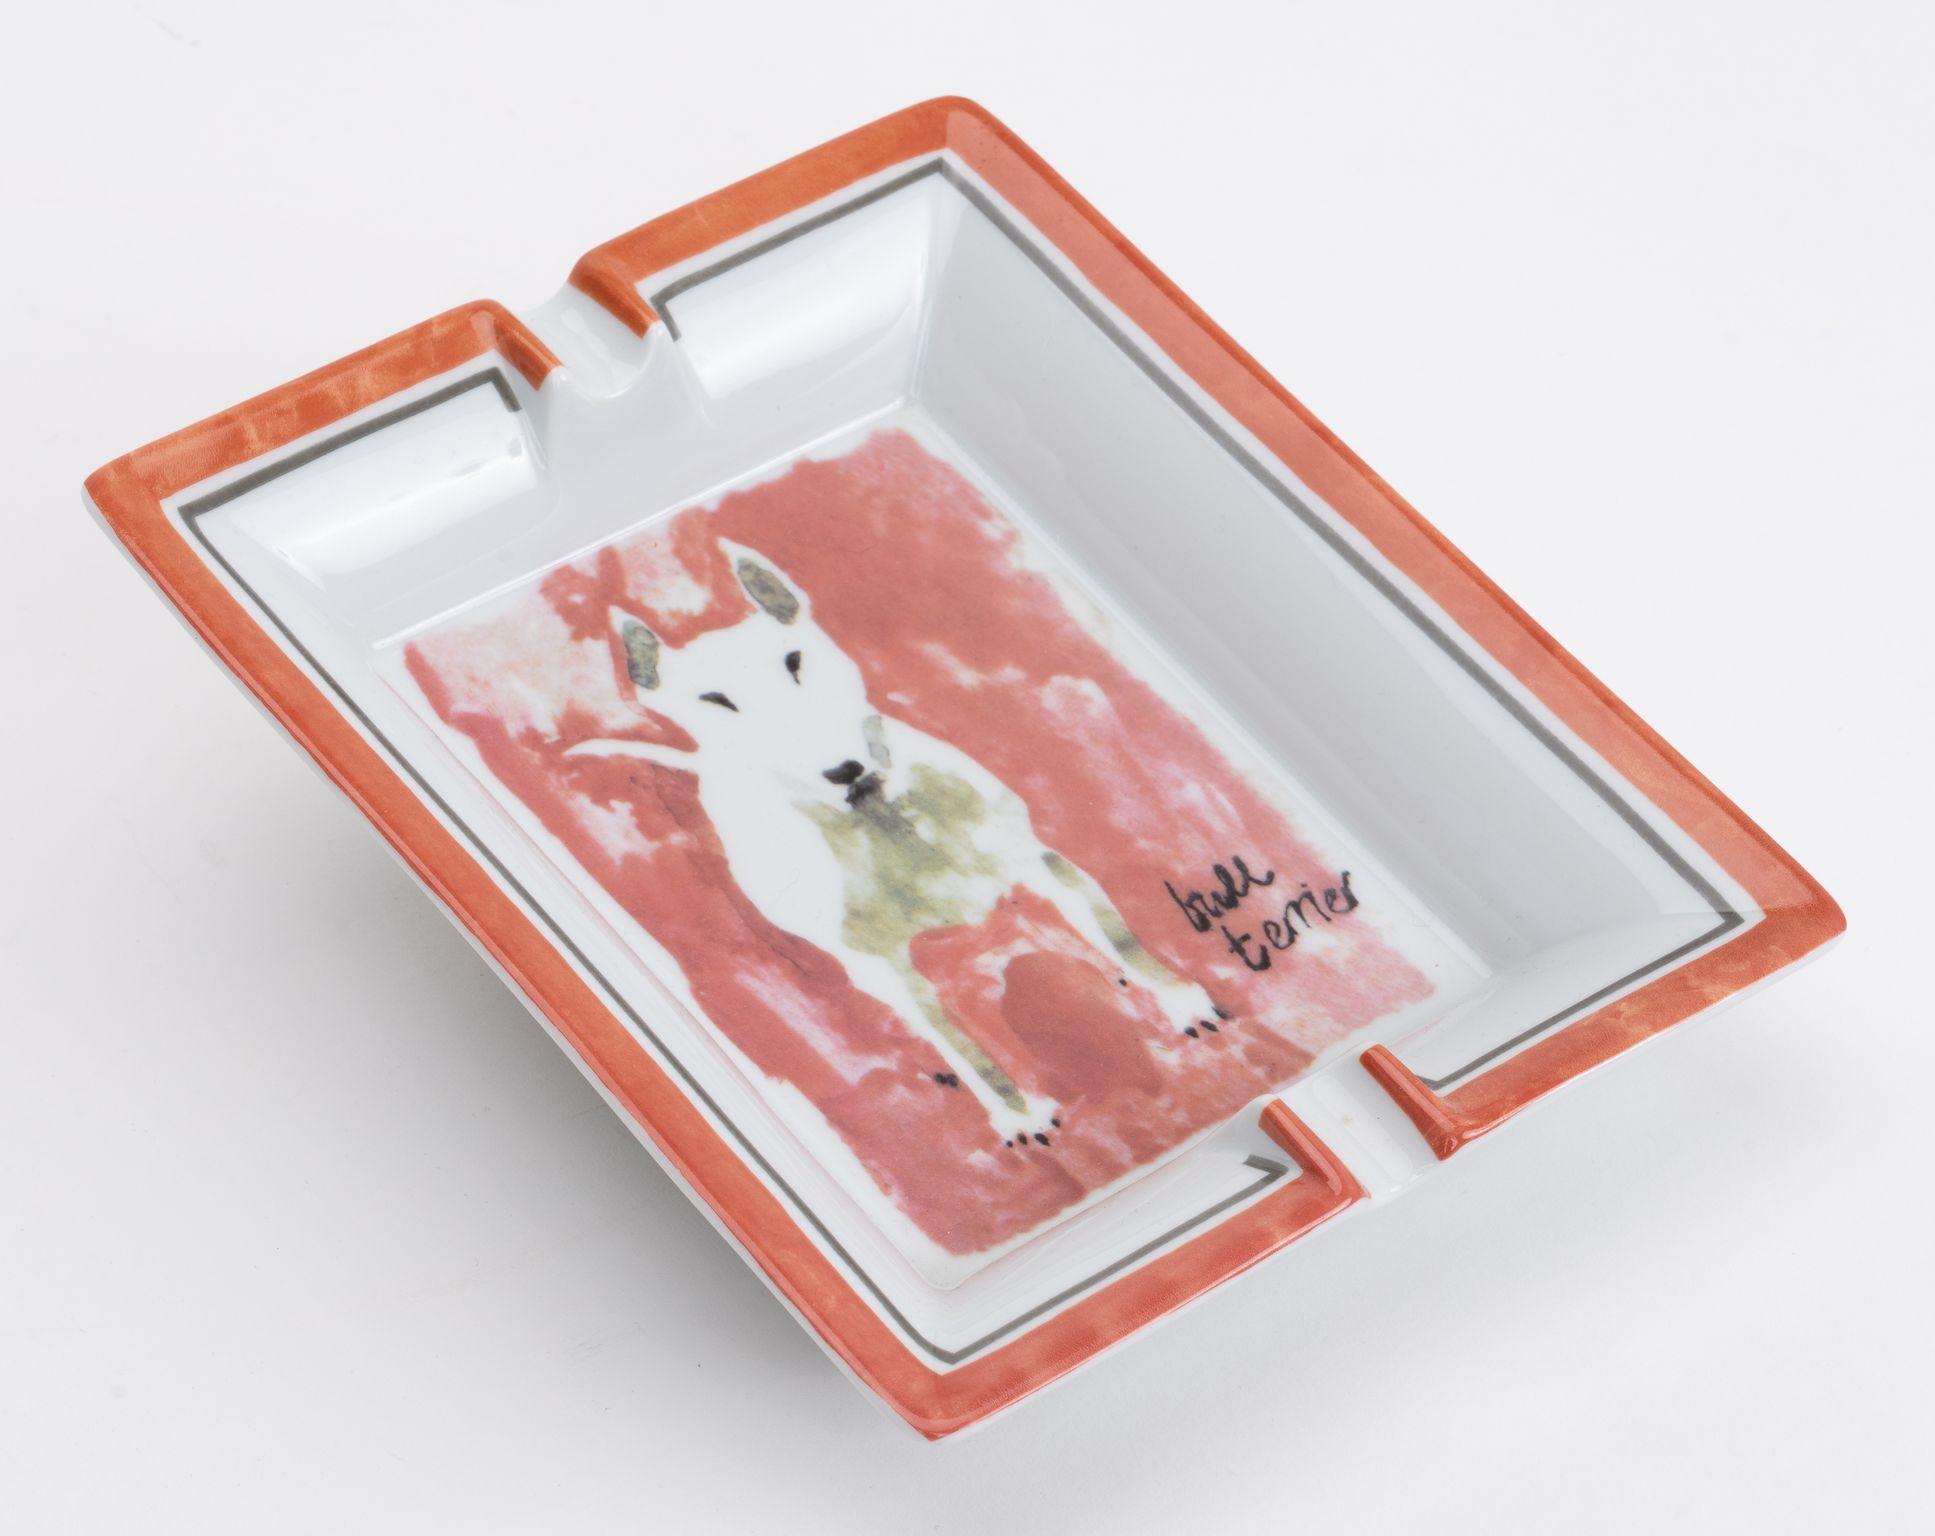 Hermès gold and white porcelain ashtray with bull terrier design. Excellent condition.